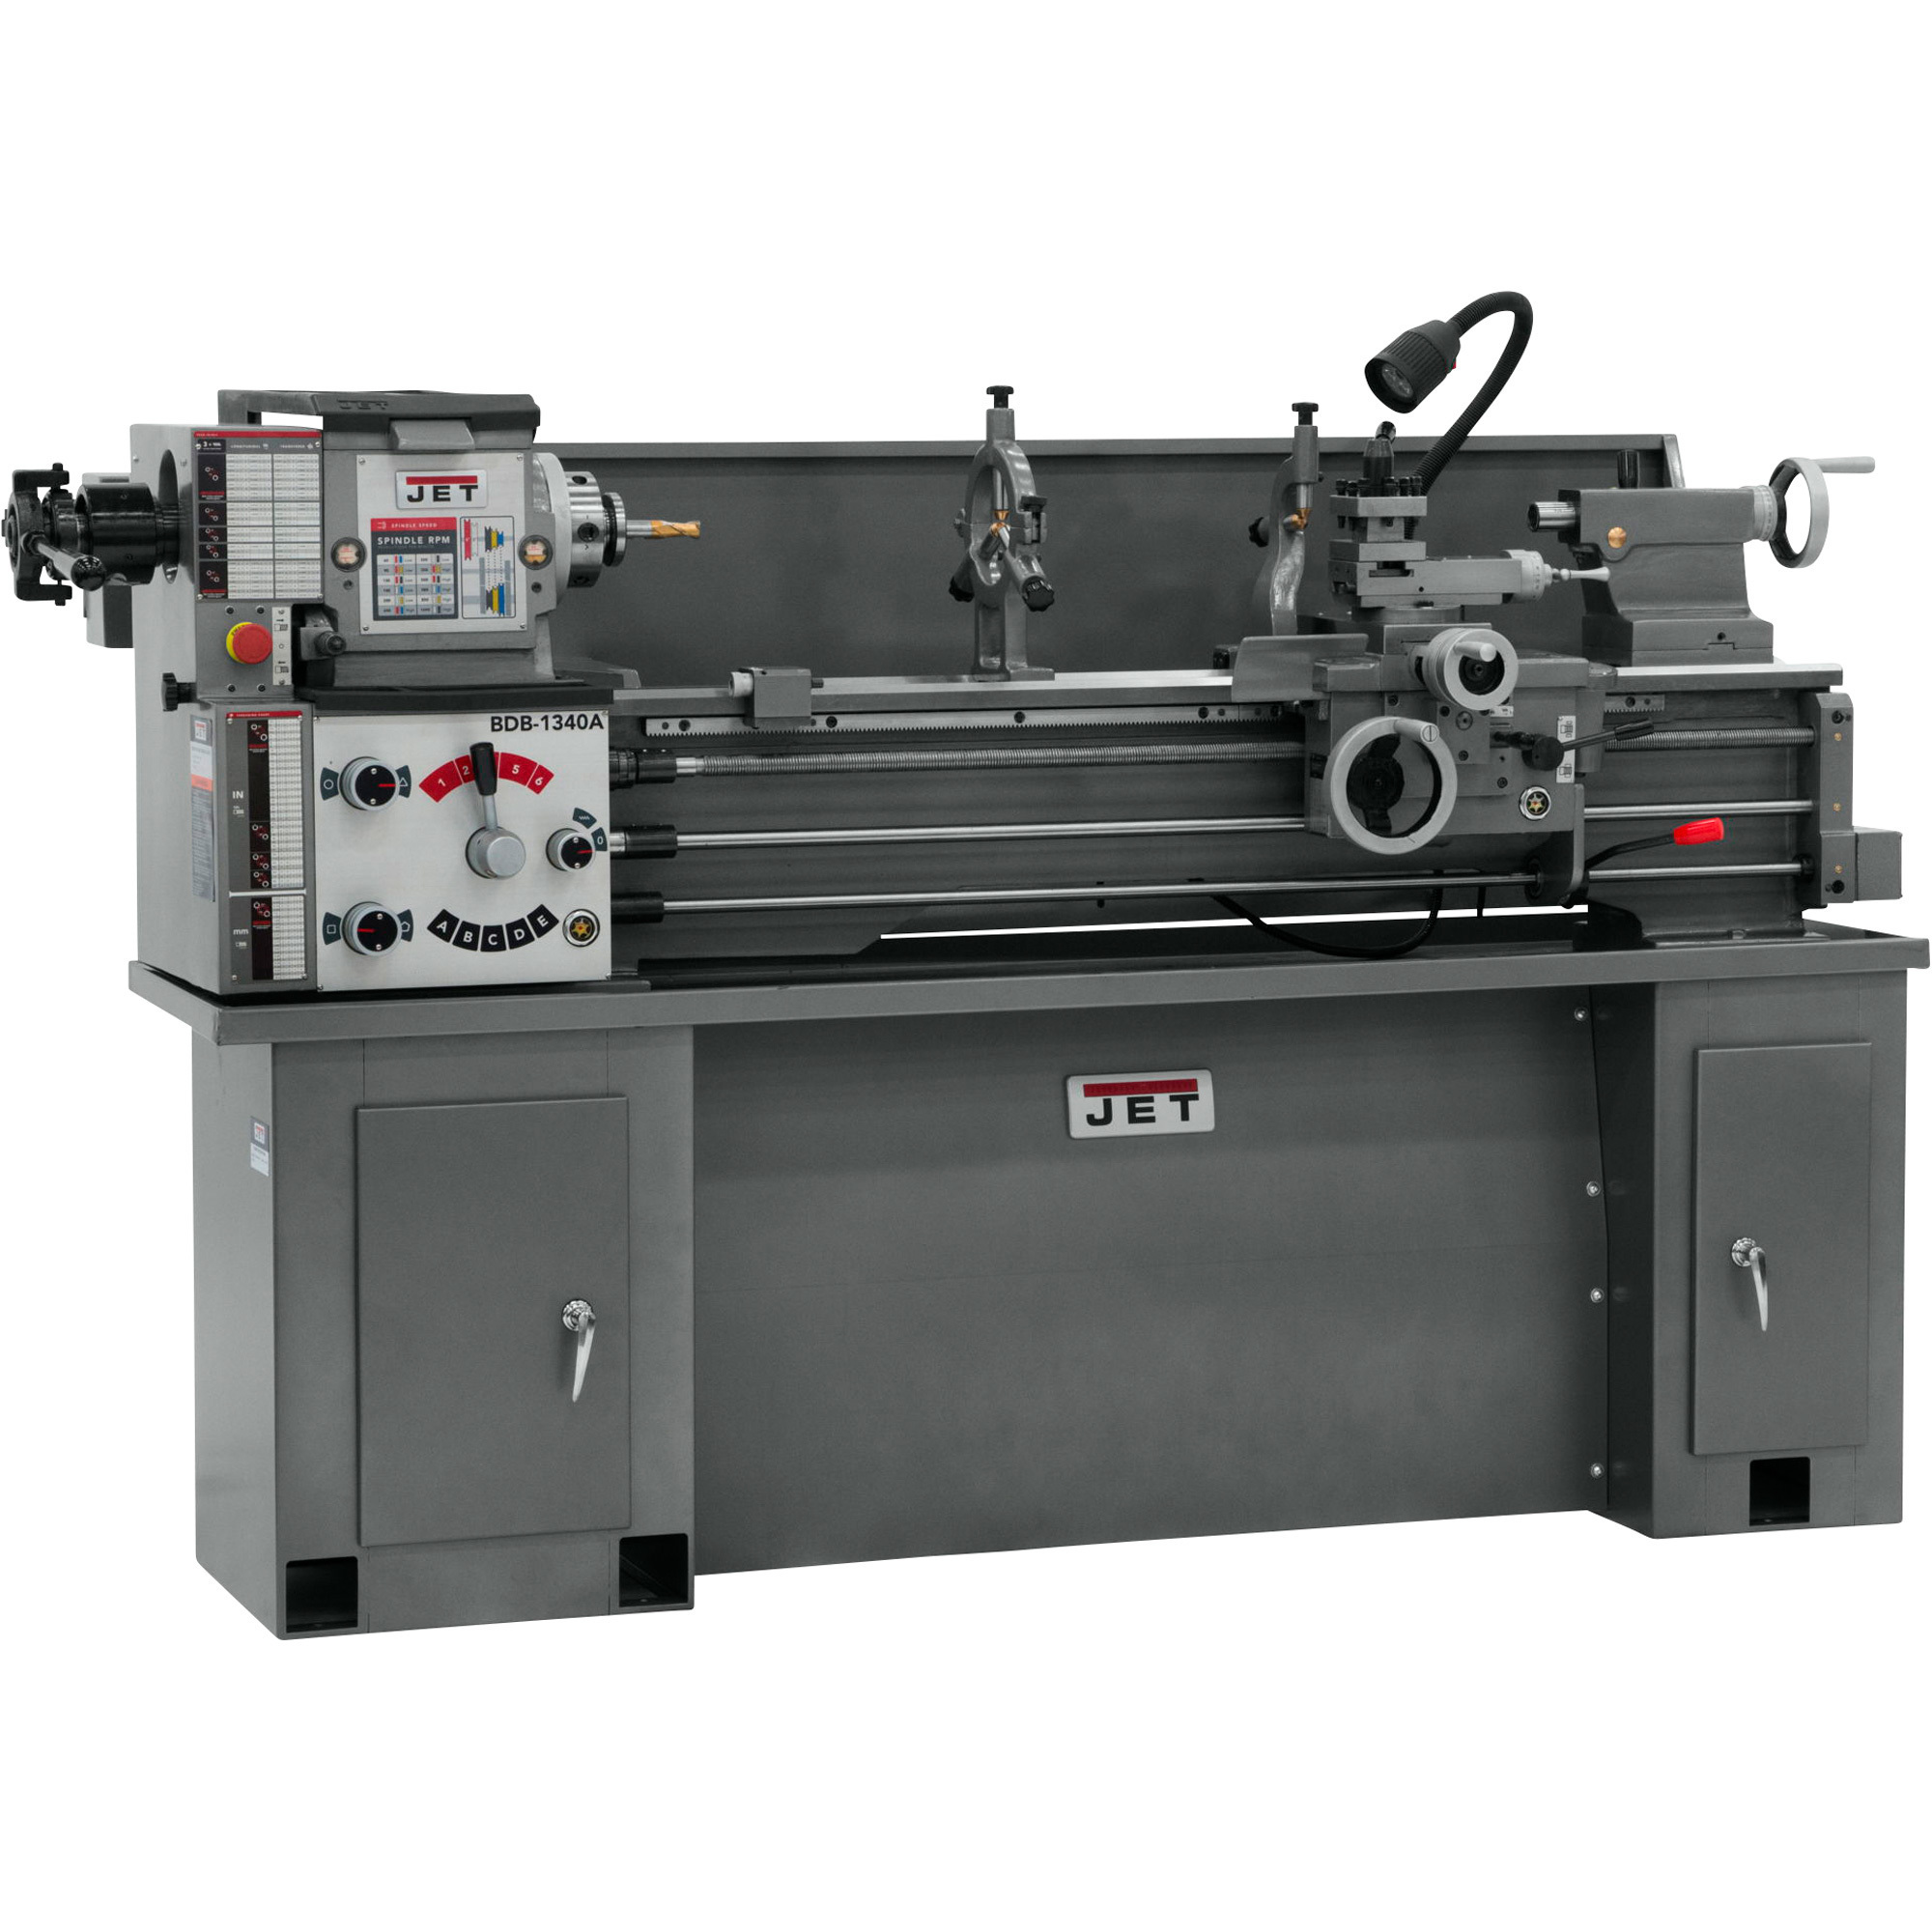 Belt Drive Bench Lathe with Acu-Rite 203 DRO— 13Inch x 40Inch, Model BDB-1340A/ - JET 321121